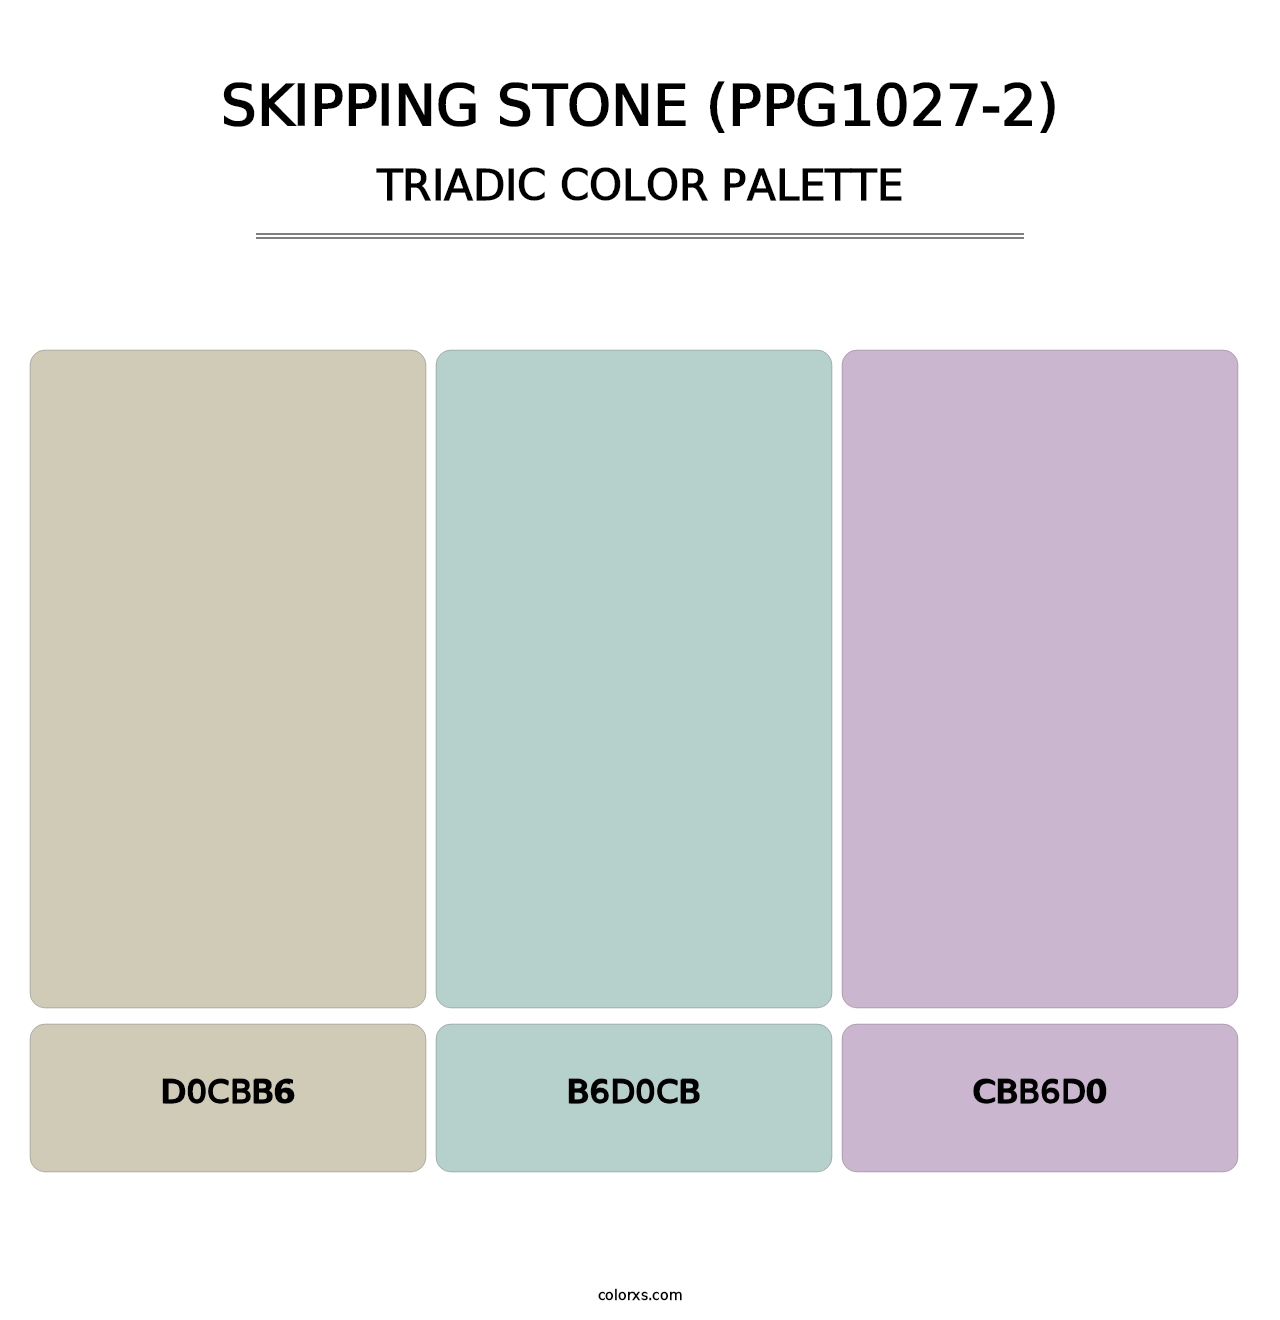 Skipping Stone (PPG1027-2) - Triadic Color Palette